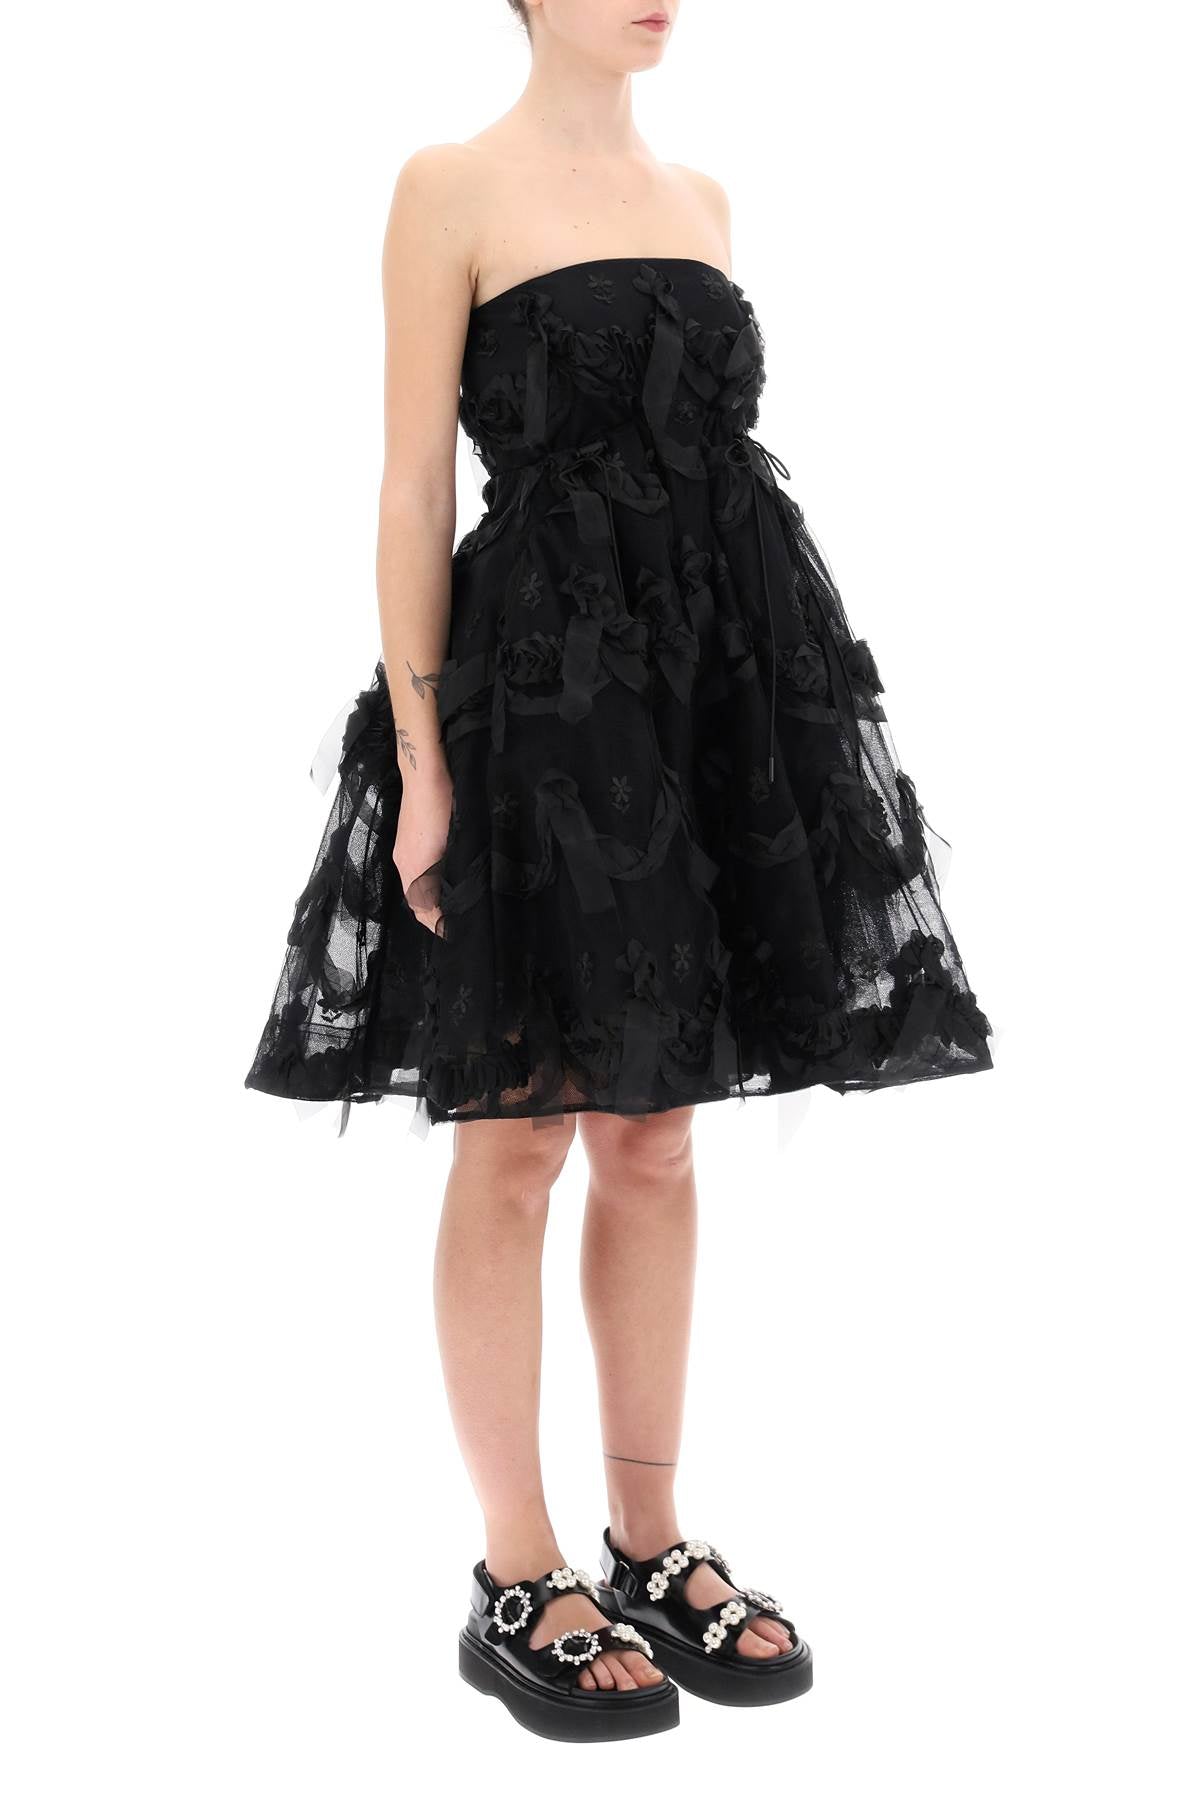 Simone rocha tulle dress with bows and embroidery.-1